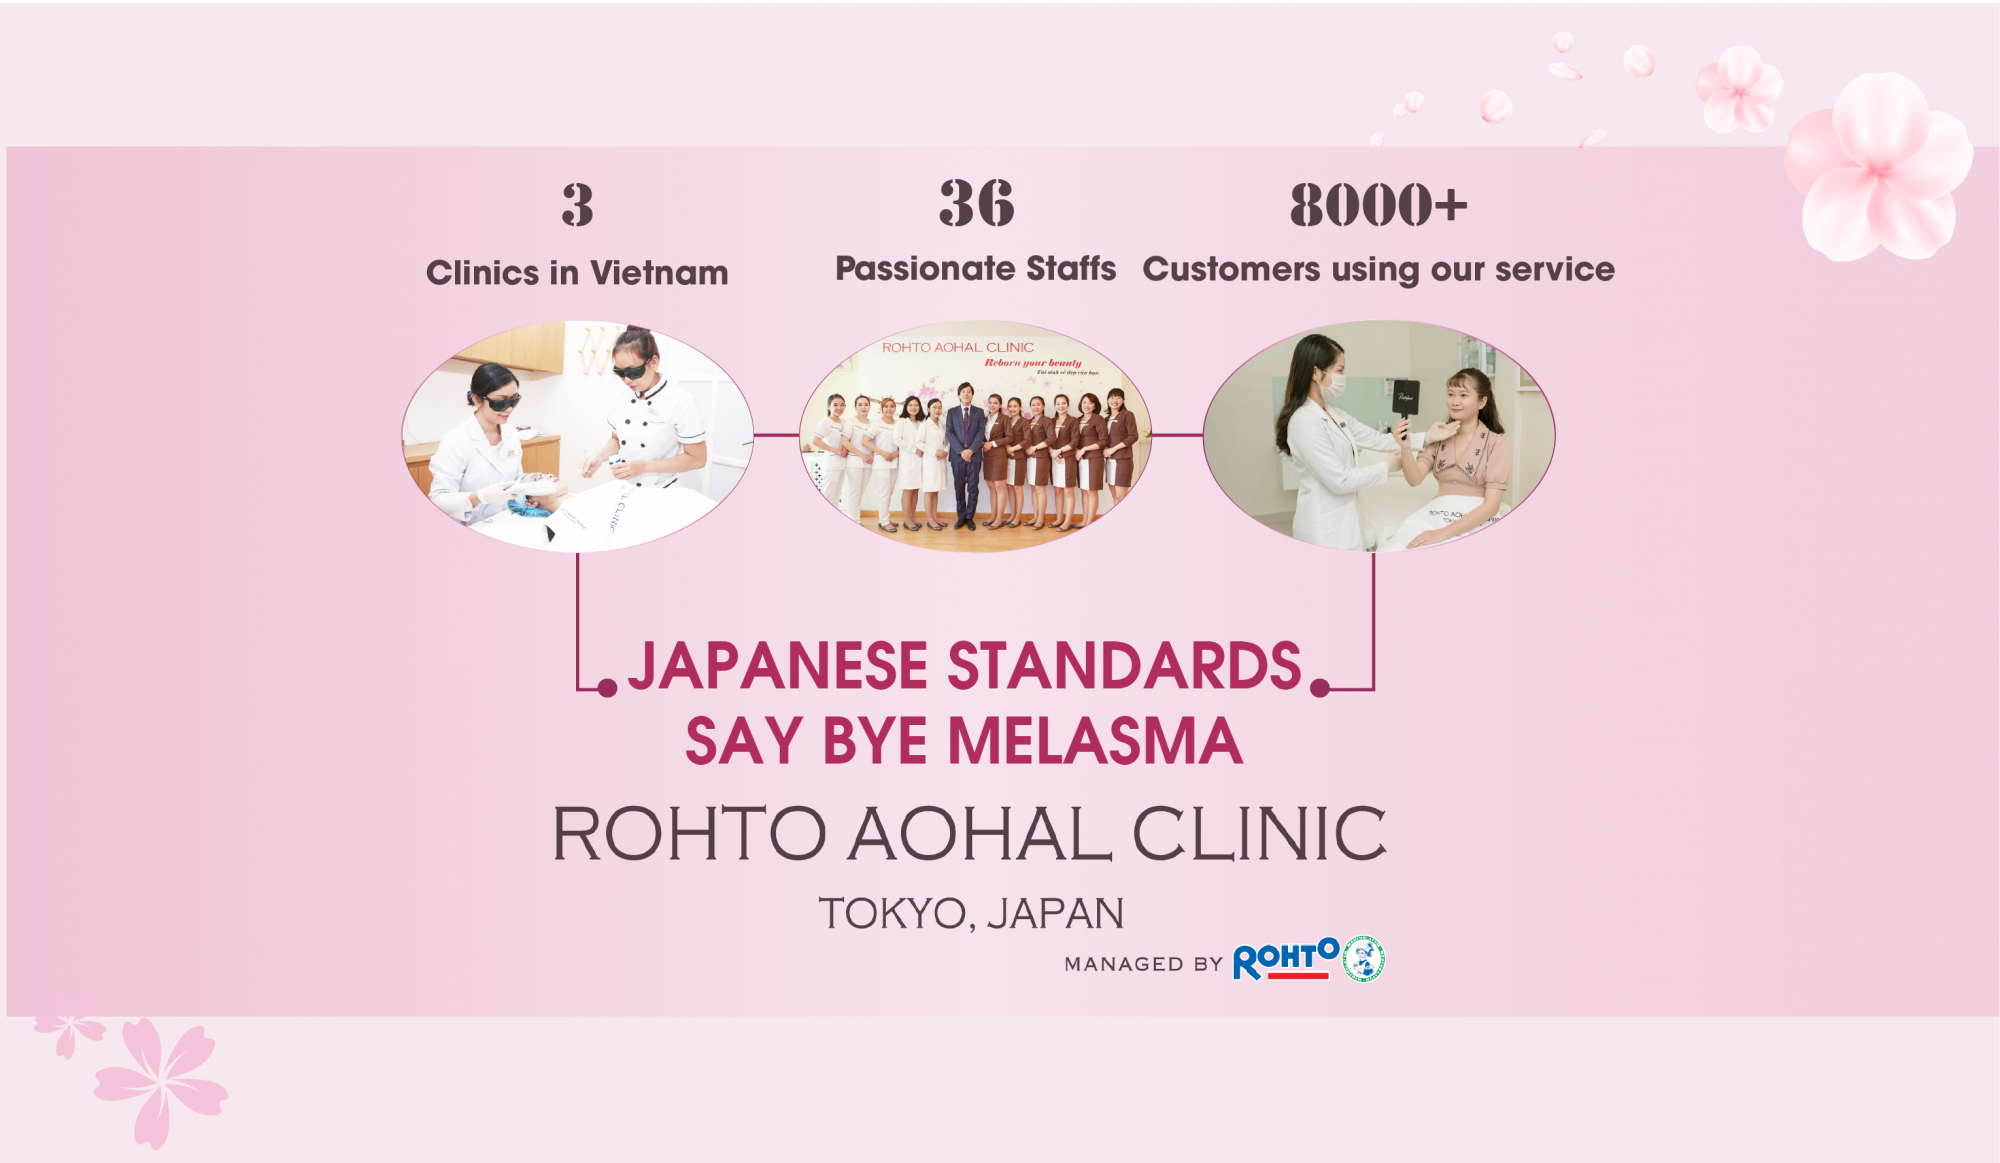 Memorable milestones of ROHTO AOHAL CLINIC over the past 7 years